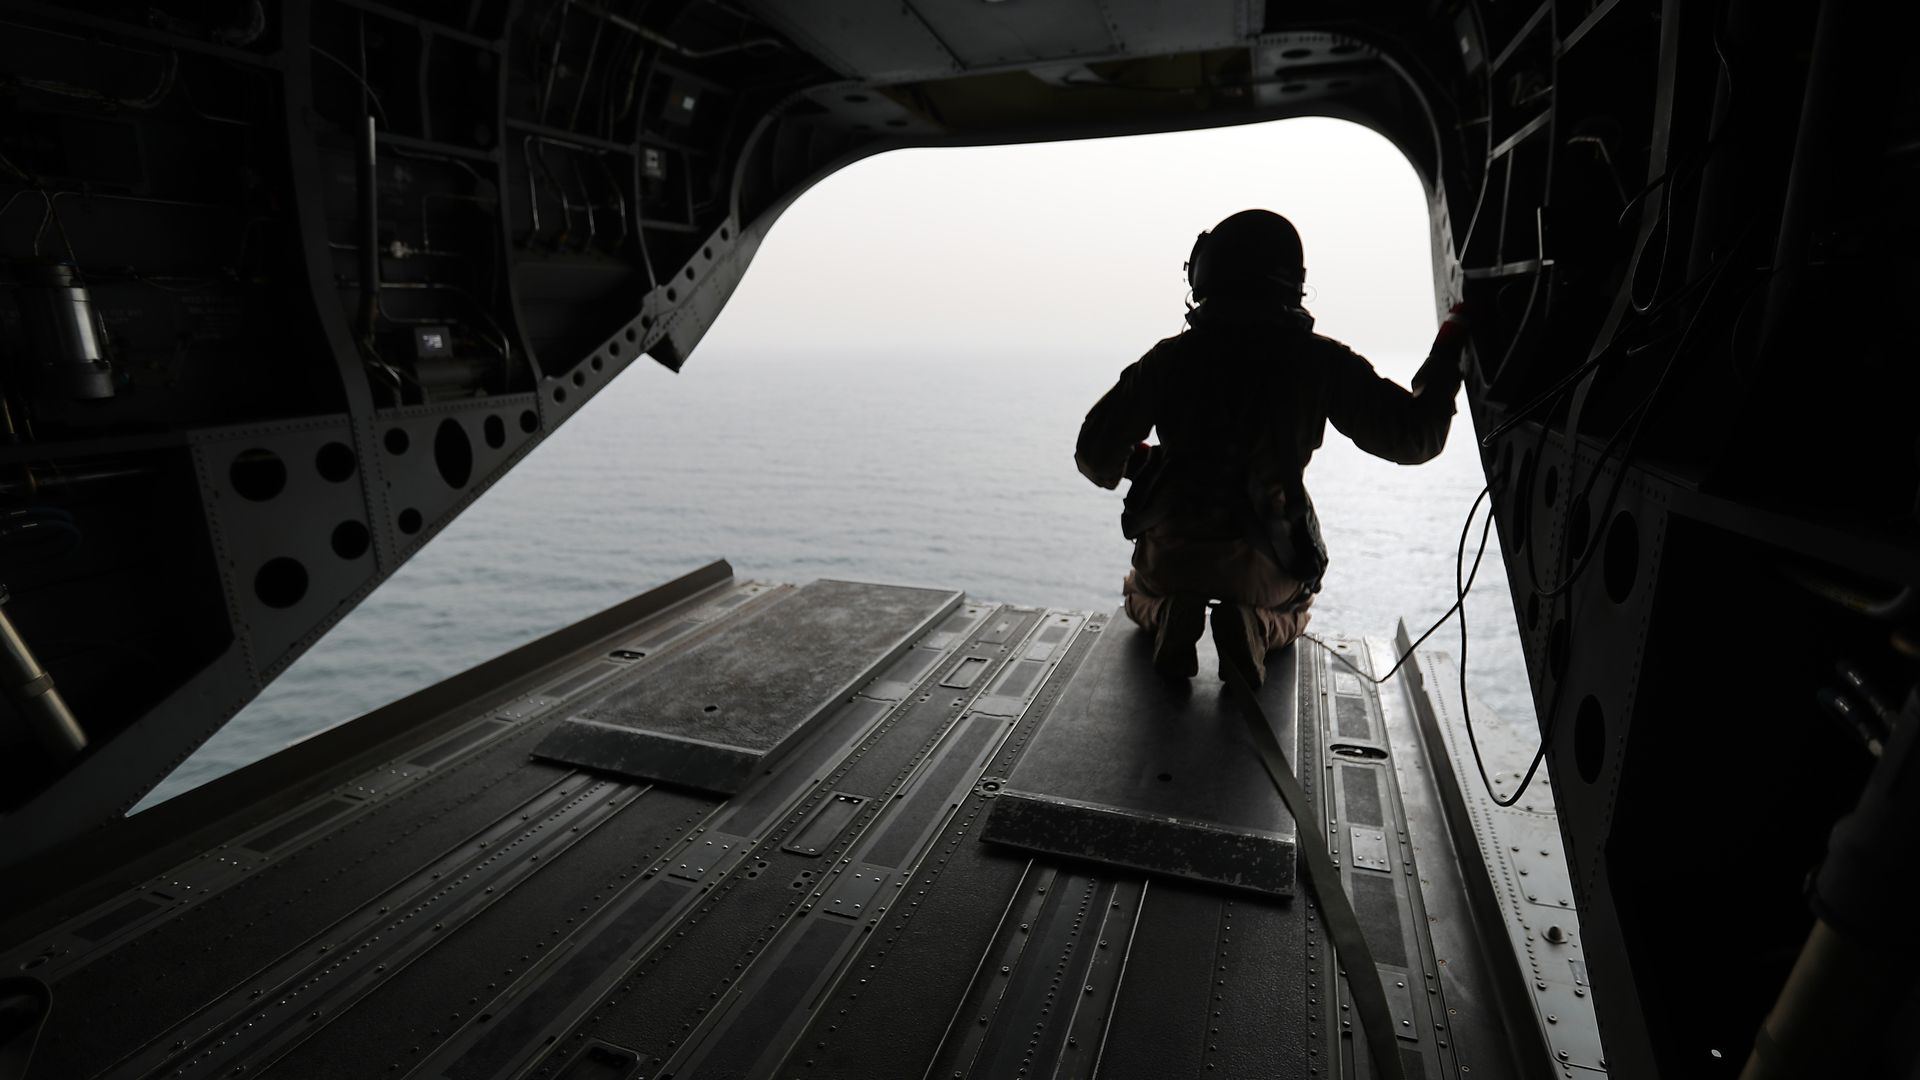 Silhouette of an Emirati soldier looking out of a military plane at the strait of Bab al-Mandab.